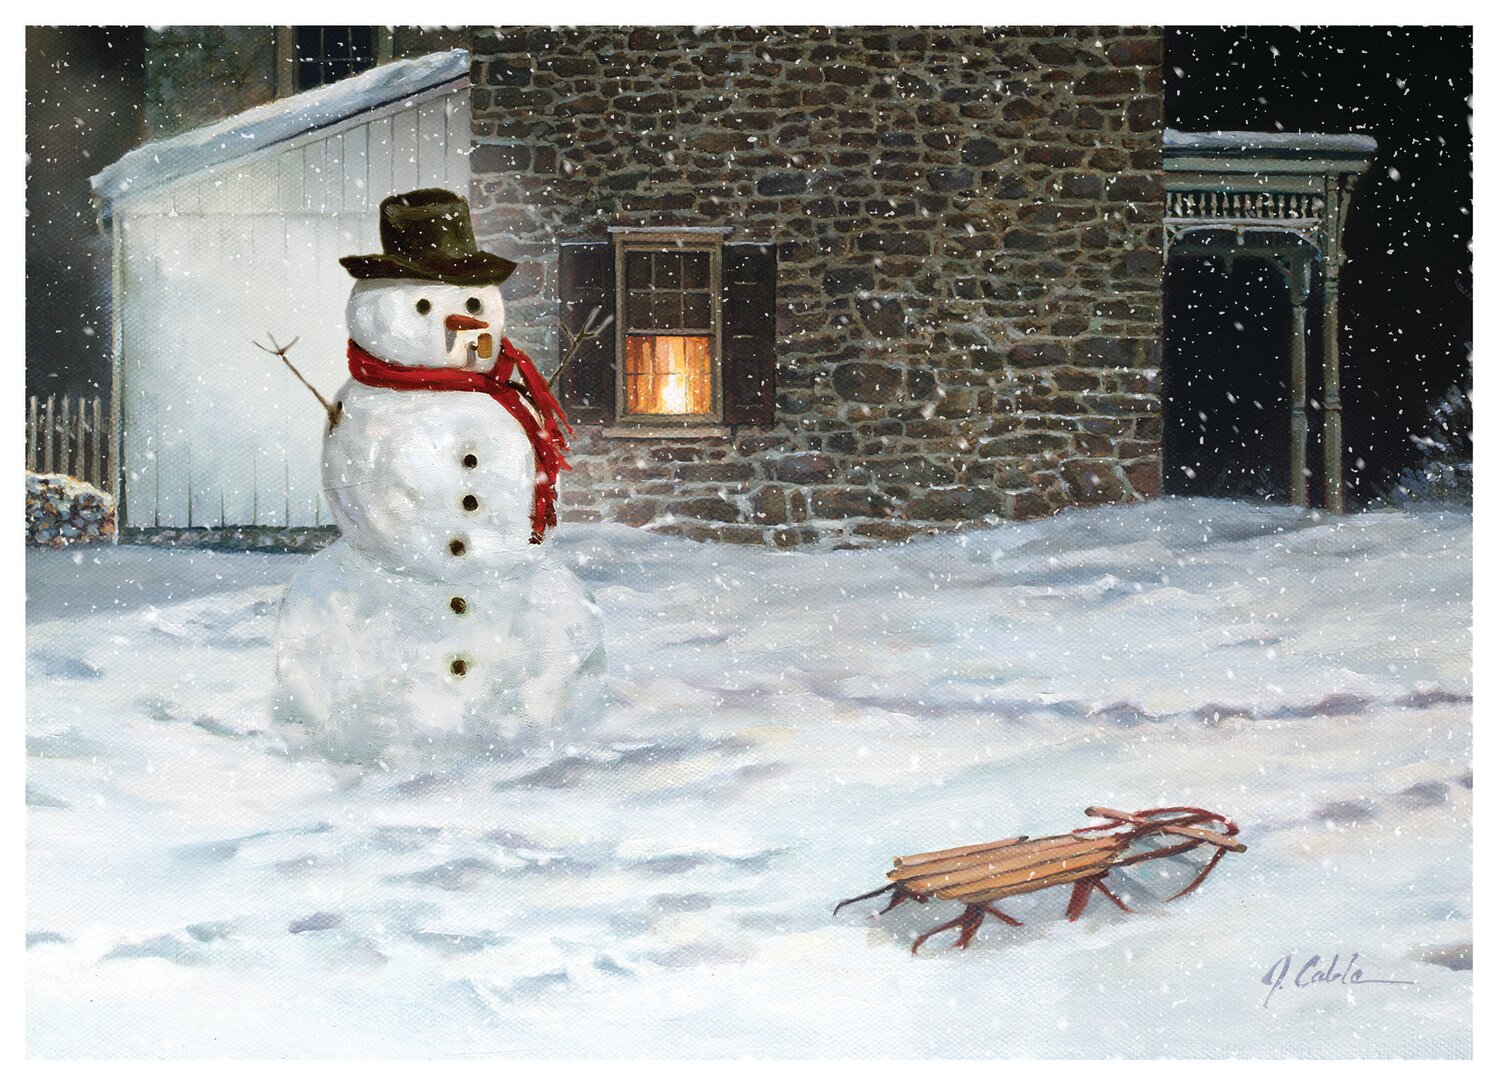 “Snow Day,” a painting by Bucks County artist Jerry Cable, graces the artist’s 2023 Christmas cards. To order yours, visit him online.